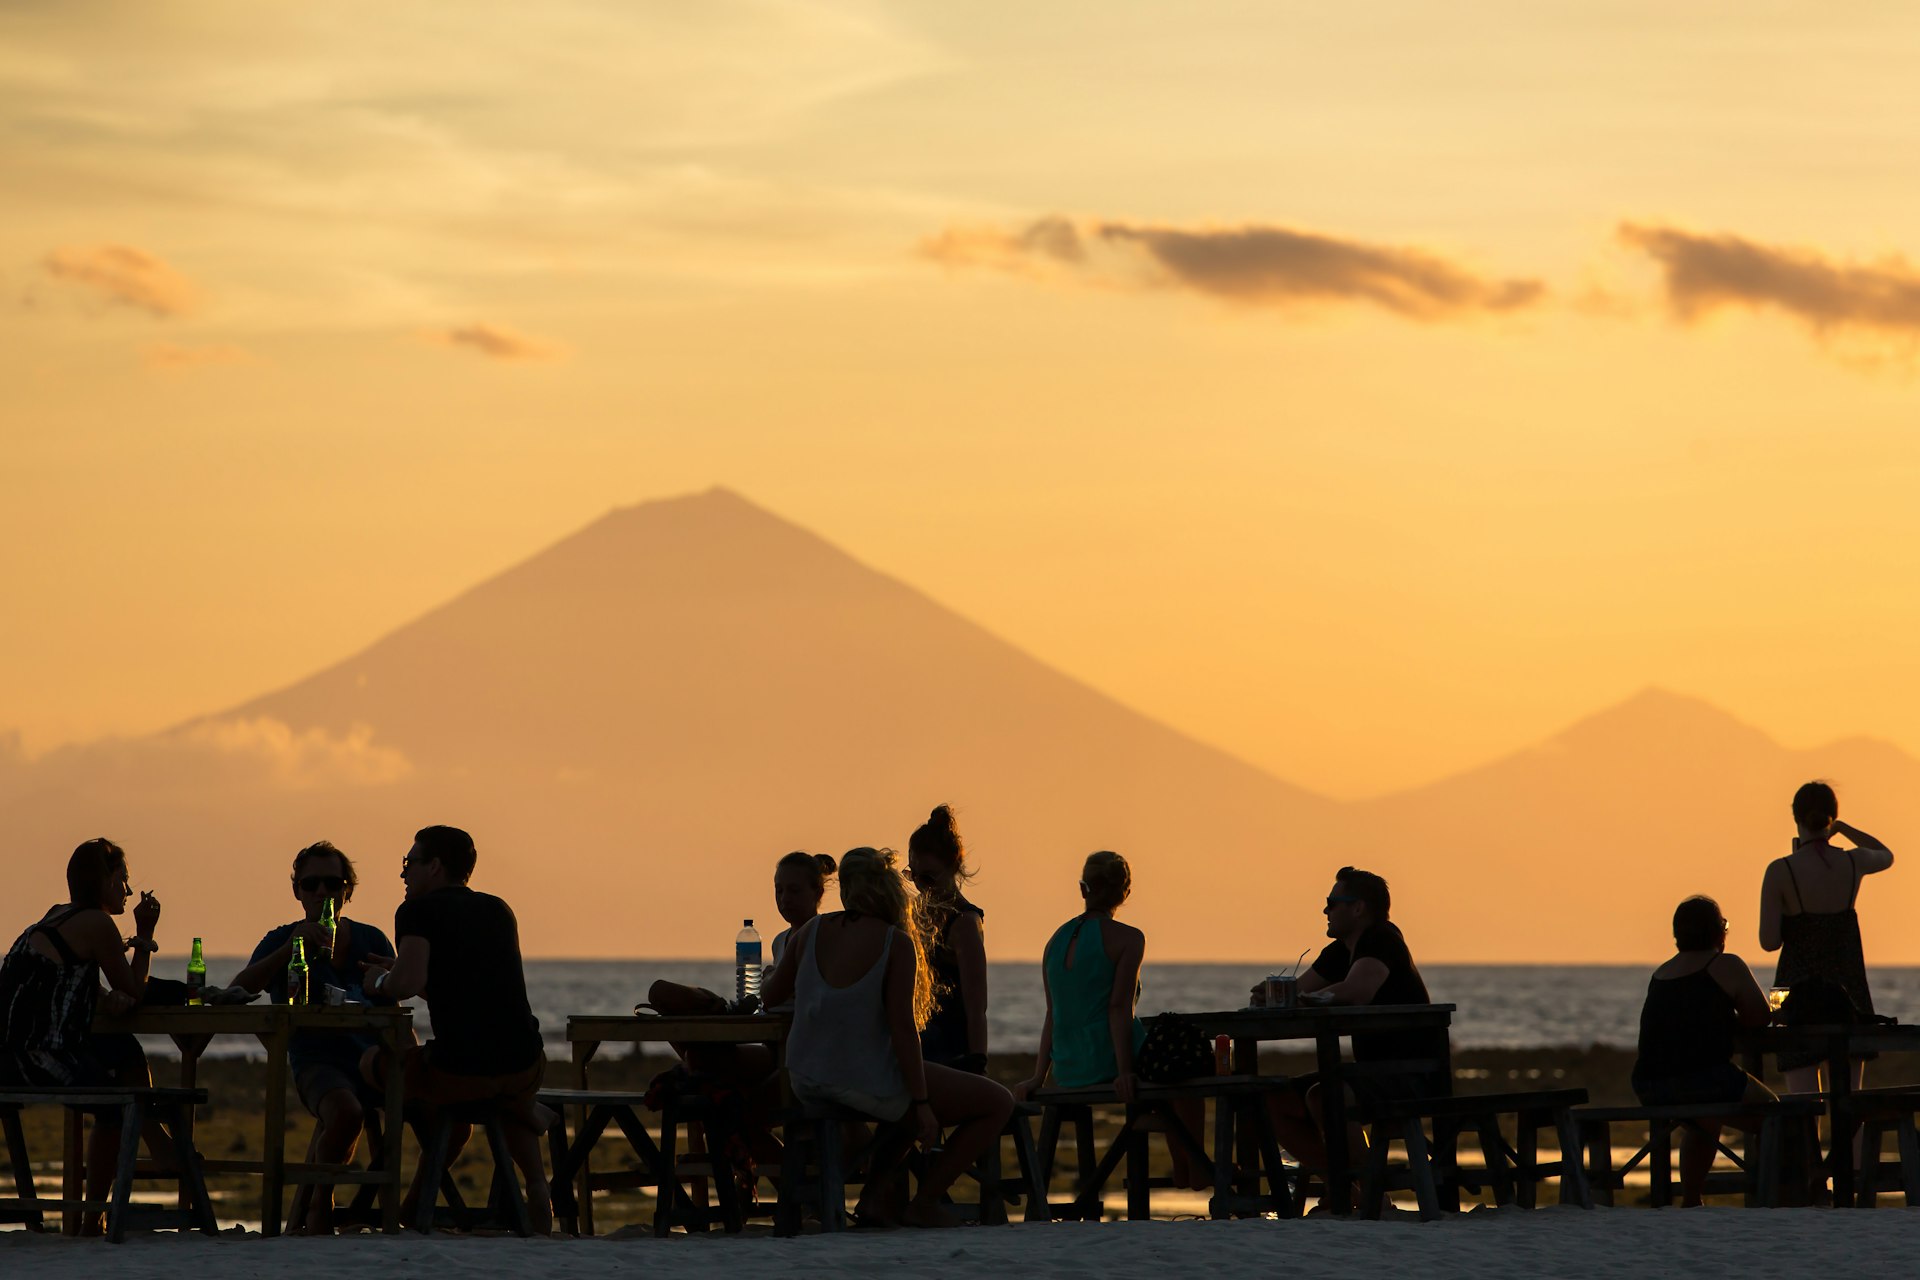 People in silhouette as the sun sets in front of them. They're watching sunset over on the island of Bali, with the cone of the distinctive Gunung Agung volcano dominating the scene